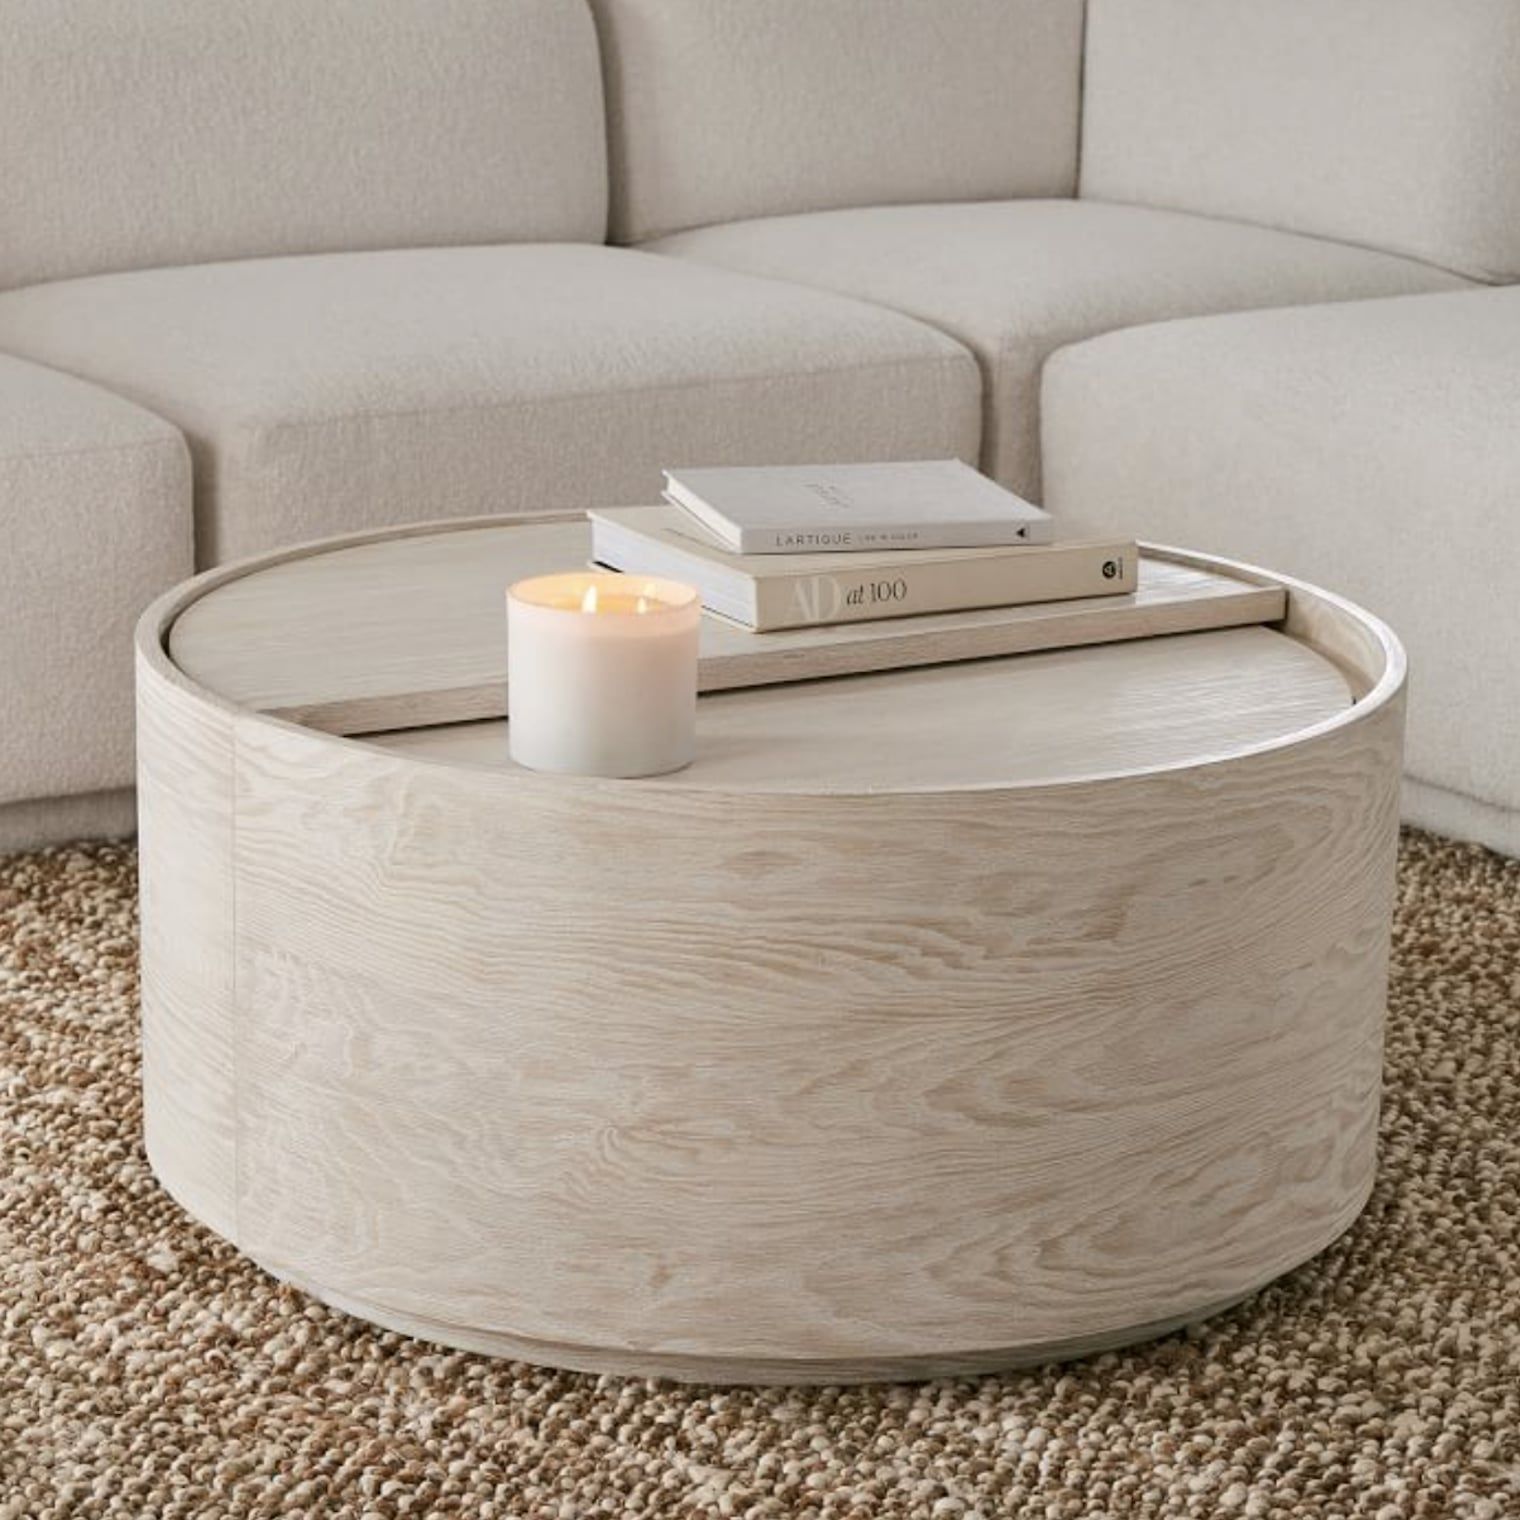 Best Coffee Tables With Storage Space 2022 | Popsugar Home Inside Coffee Tables With Storage (View 7 of 20)